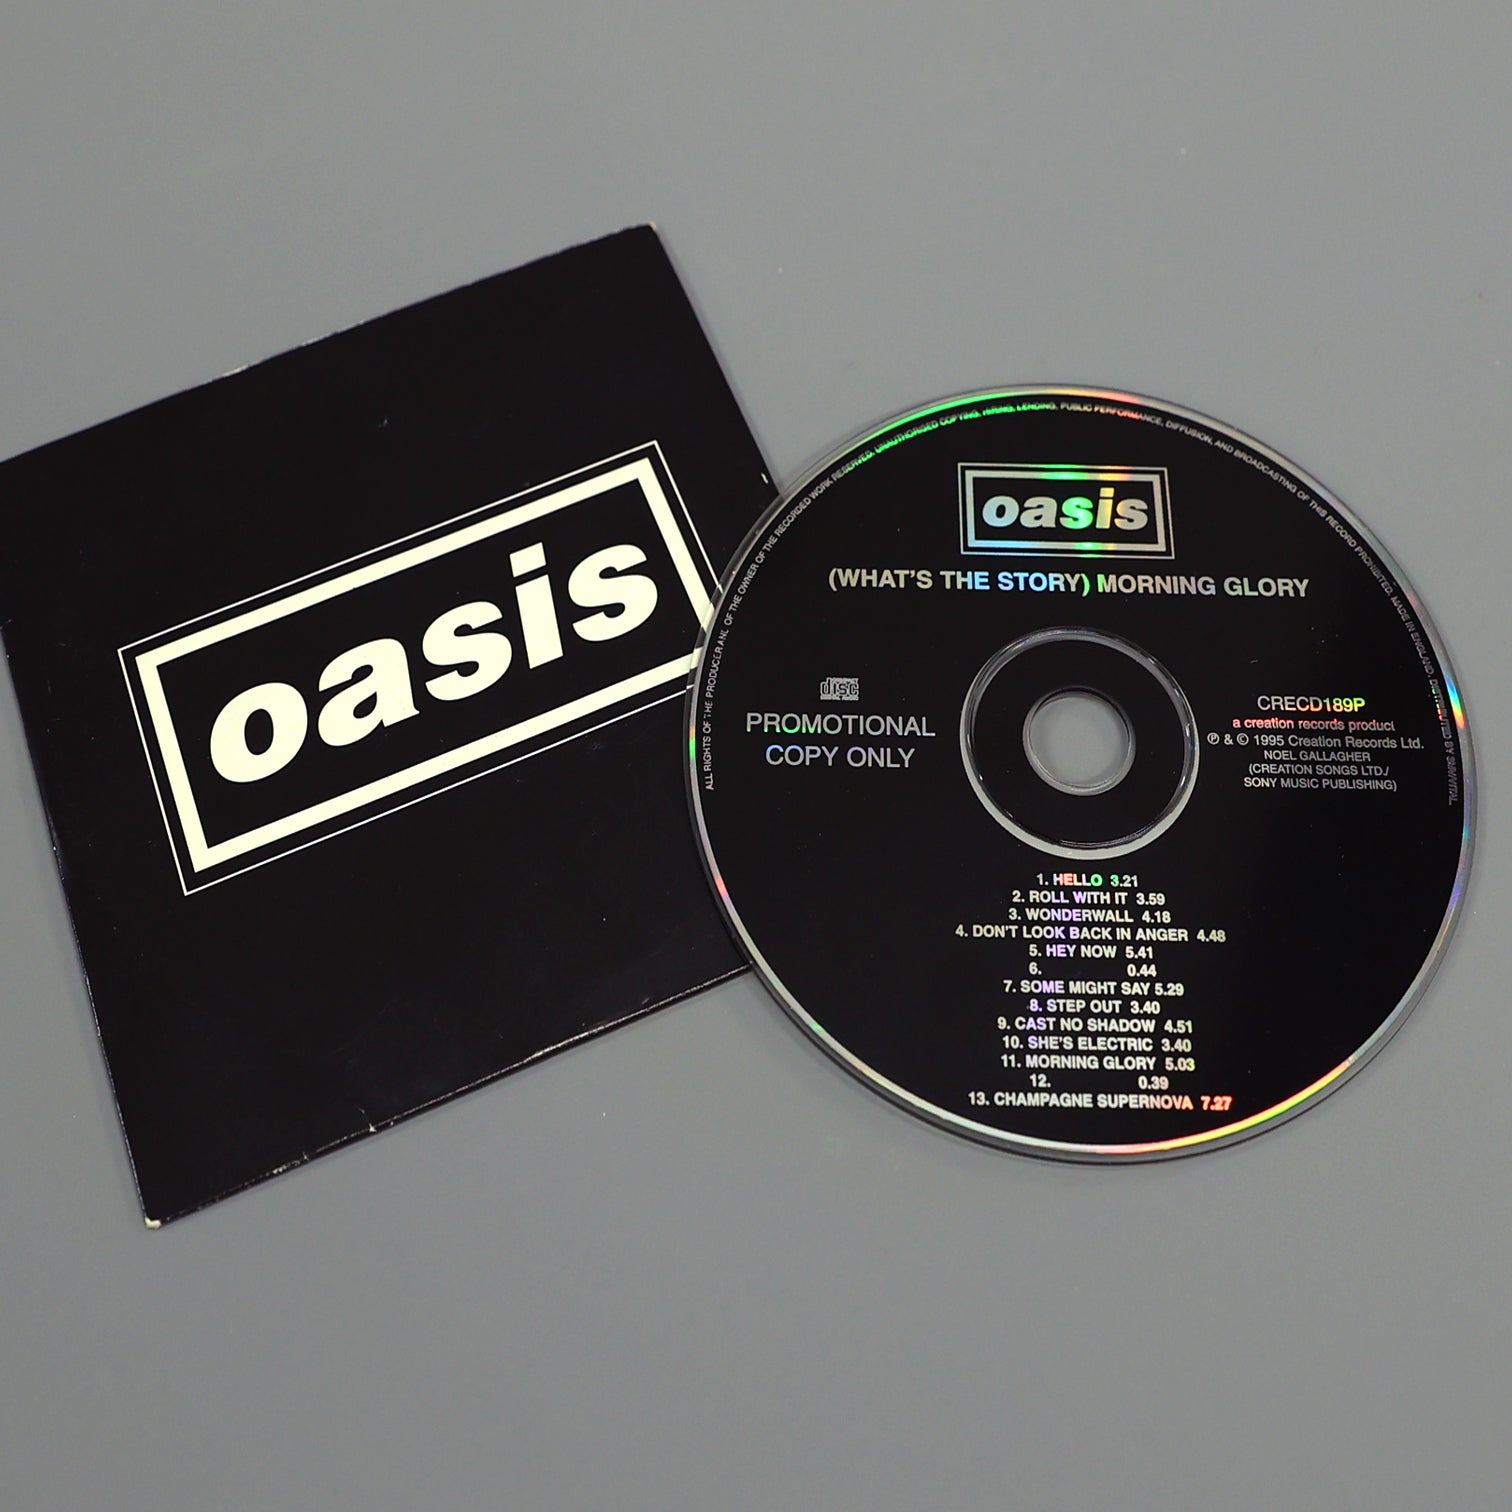 Oasis - Morning Glory - WITHDRAWN 13 Track promo CD - New Item